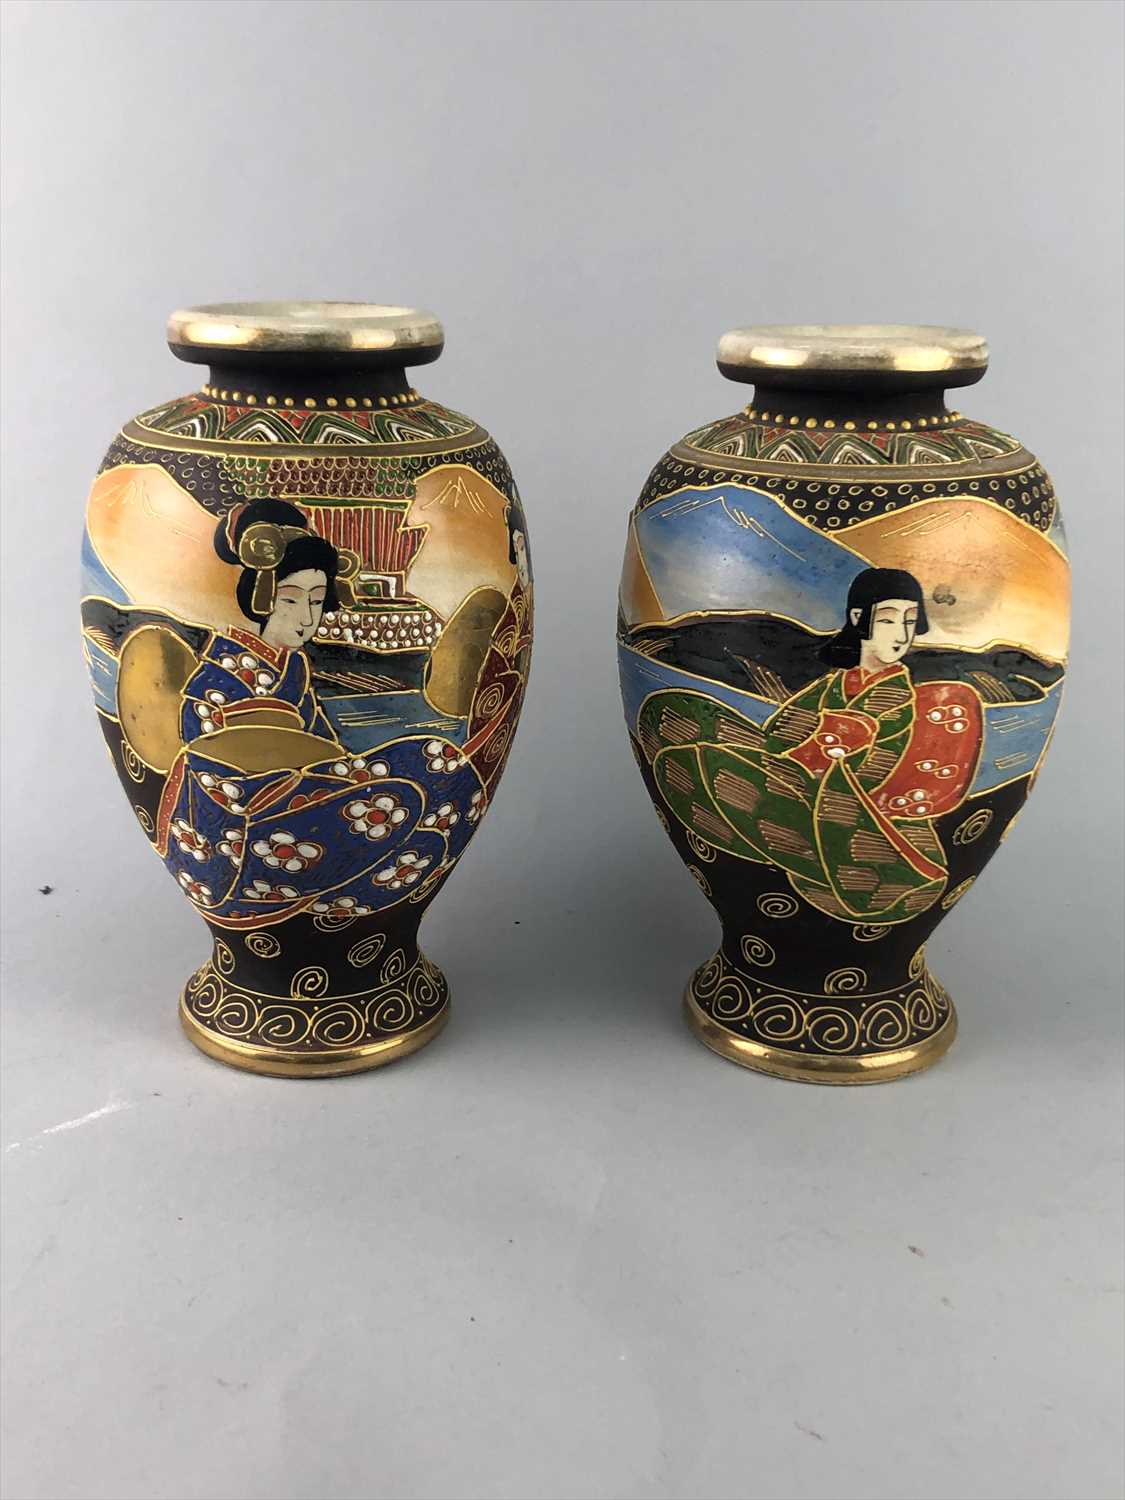 Lot 44 - A PAIR OF CHINESE SATSUMA VASES ALONG WITH A TEAPOT AND BOWL